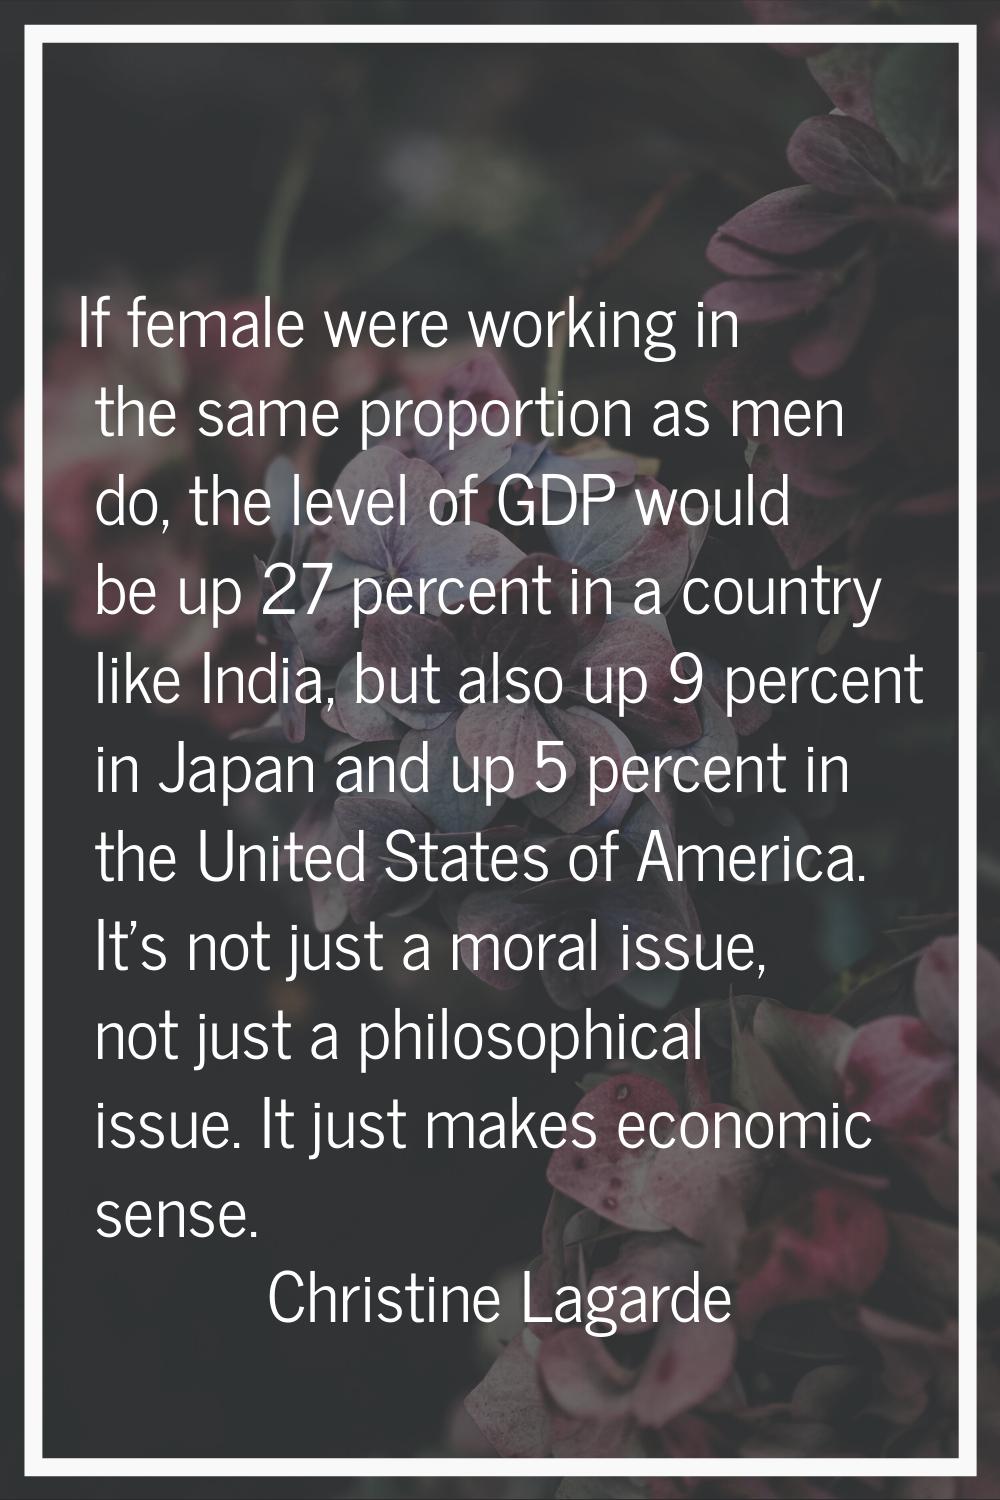 If female were working in the same proportion as men do, the level of GDP would be up 27 percent in